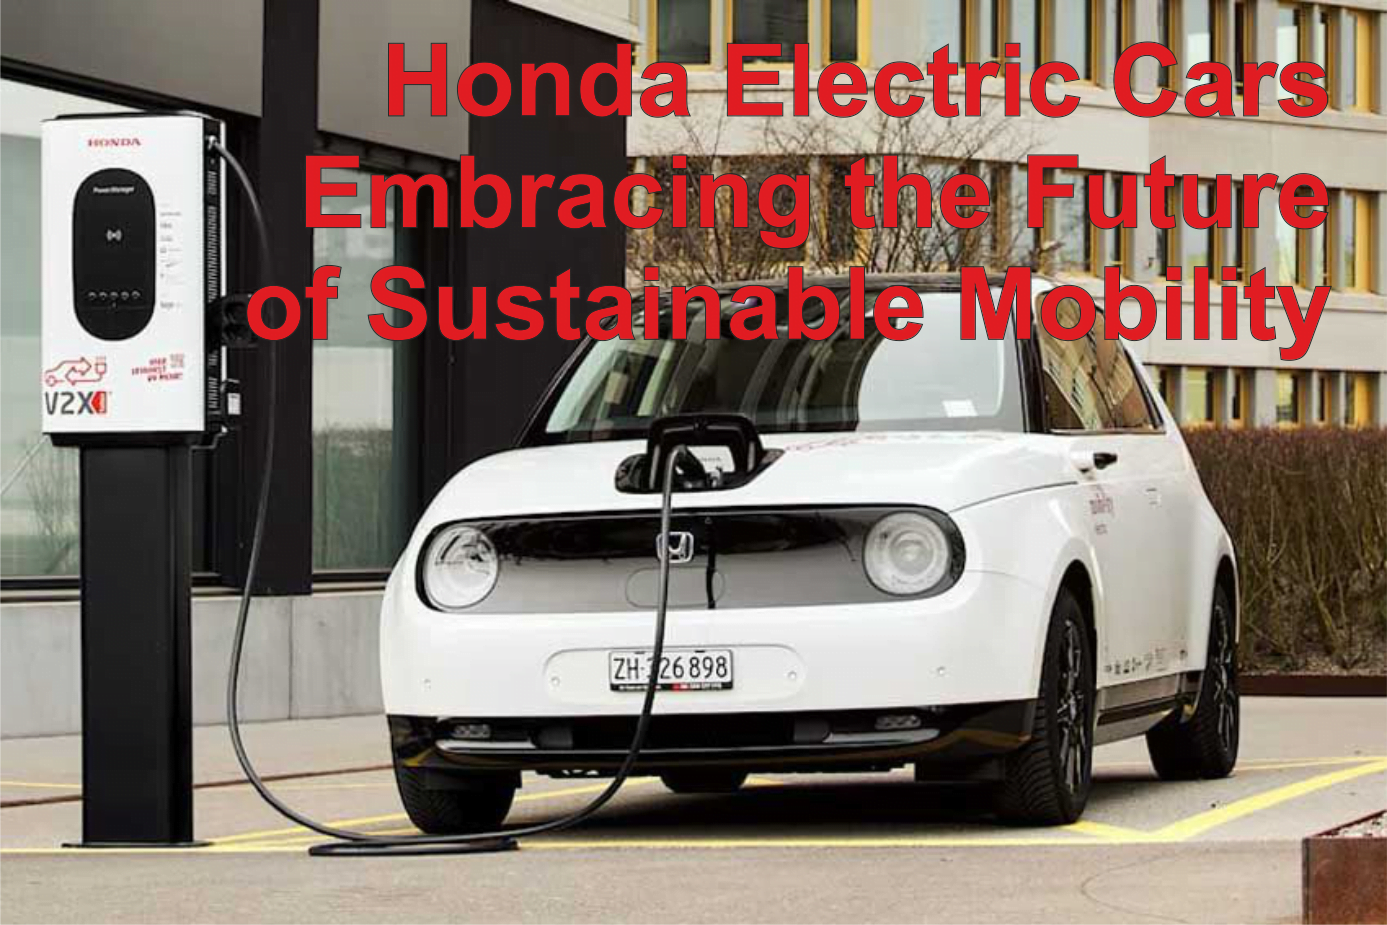 Honda Electric Cars: Embracing the Future of Sustainable Mobility